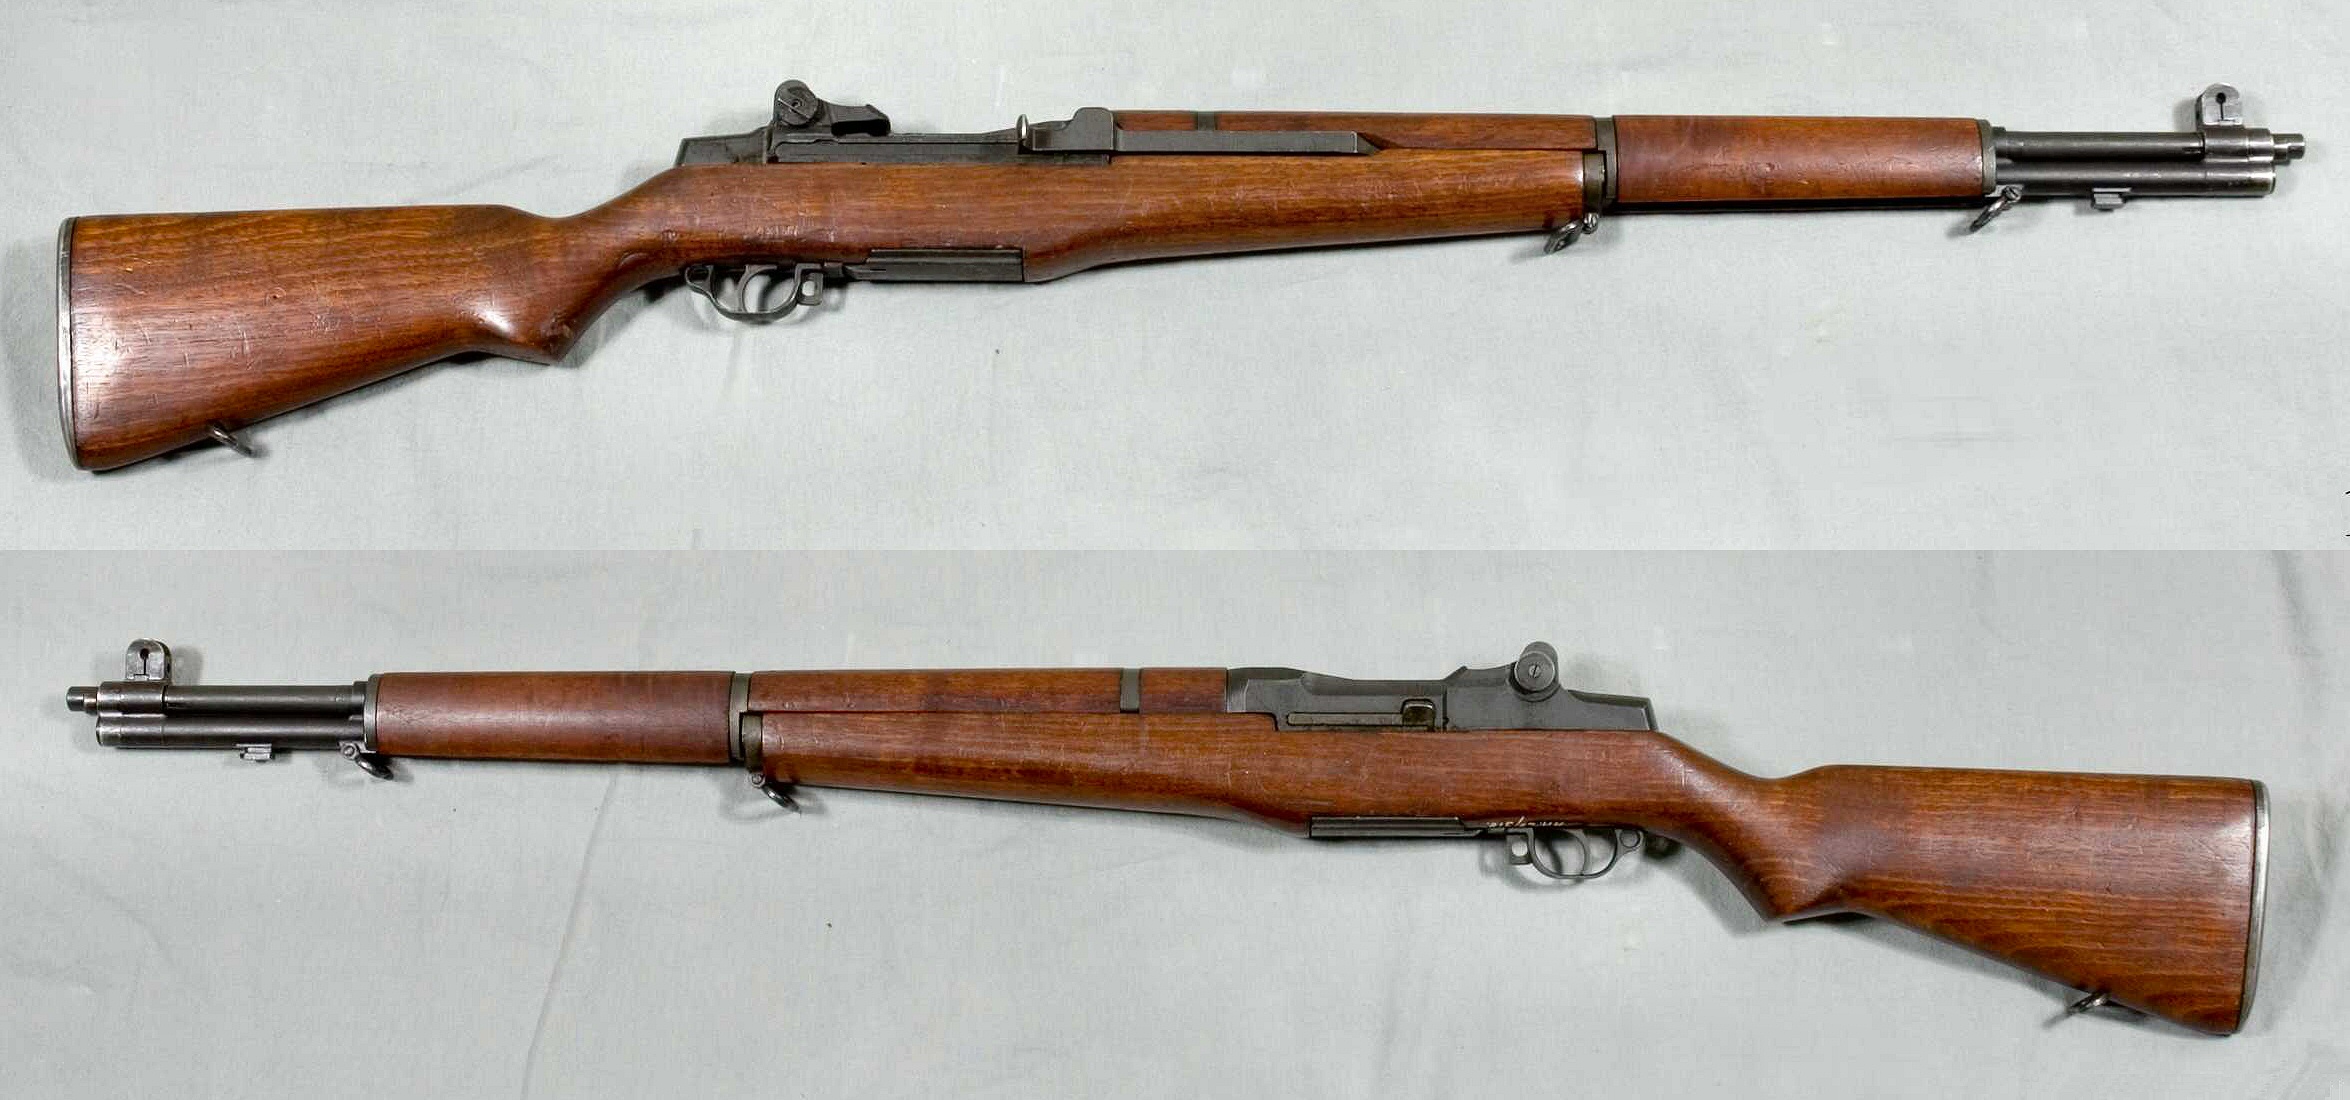 Gt Ww2 Gt Musket 134770673 Added By Asotil At Sabaton - musket roblox id